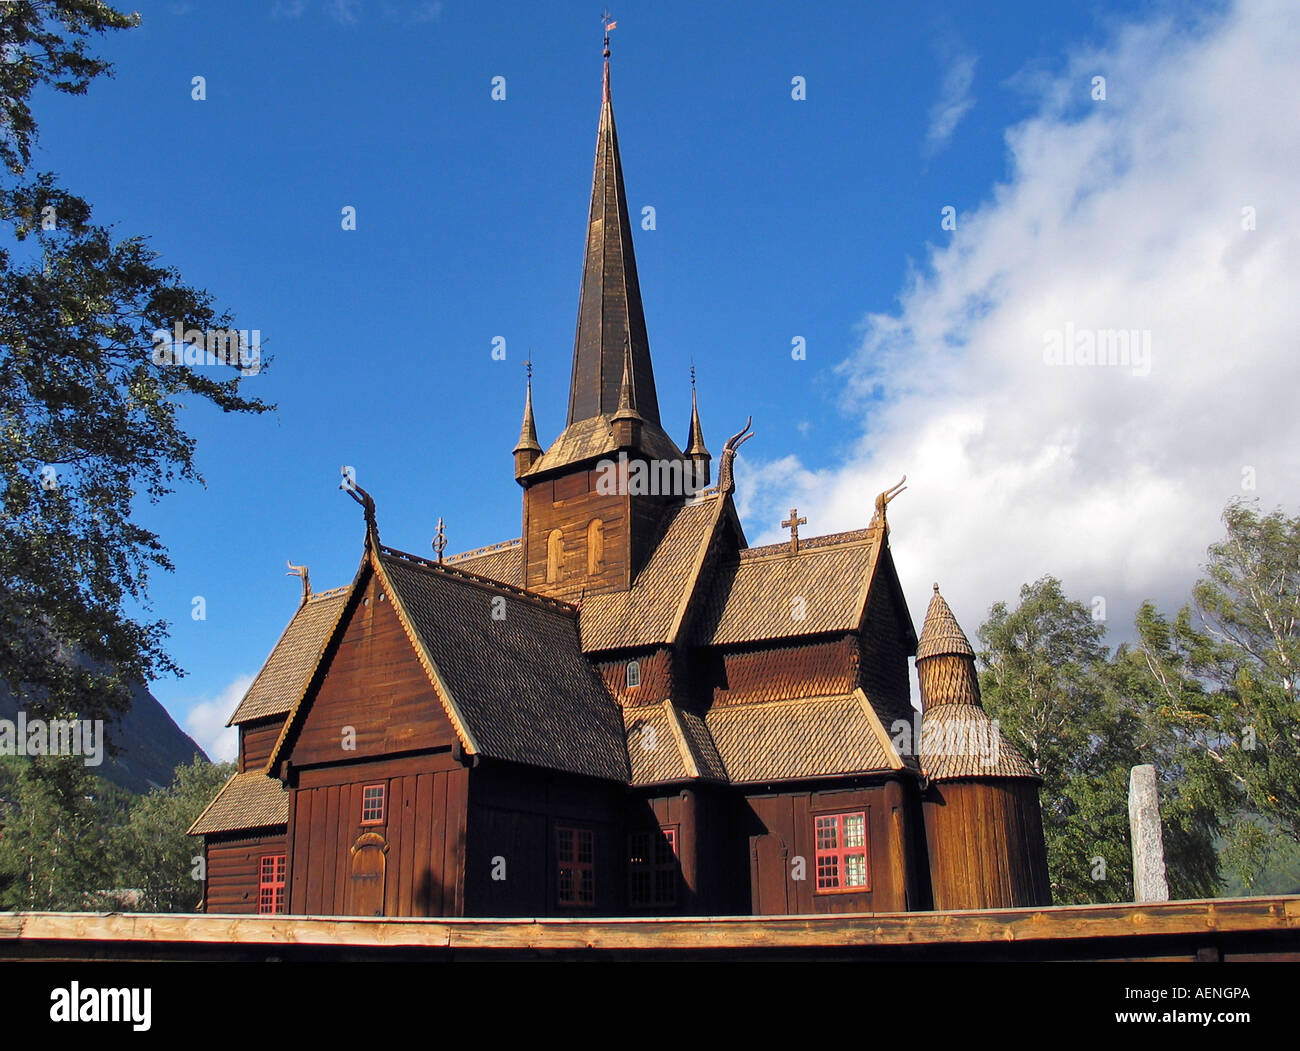 Stave church Lom, Norway against blue sky during Indian summer Stock Photo